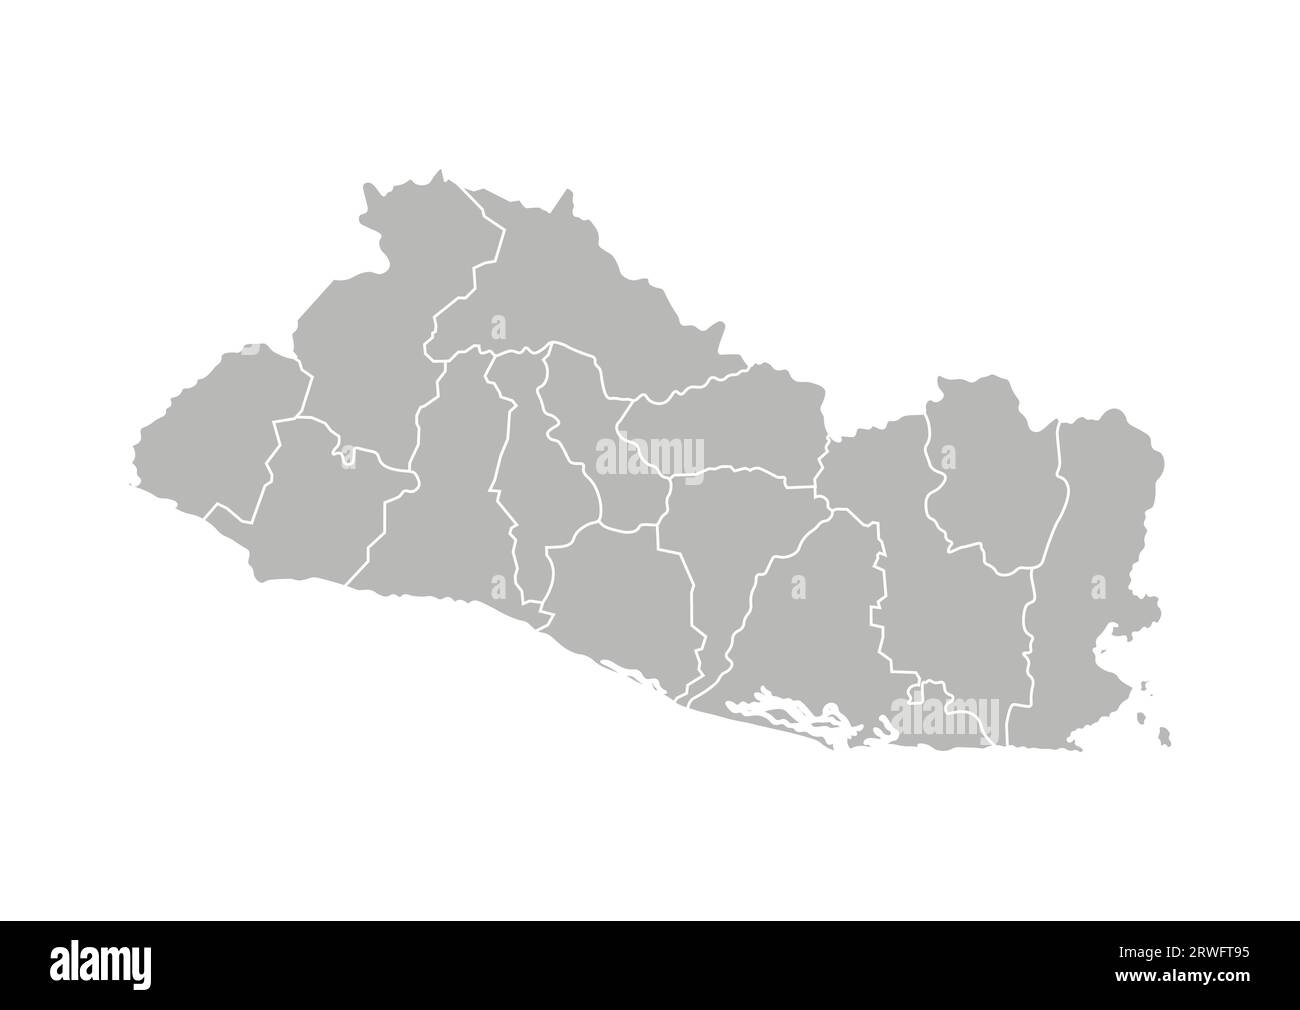 Vector isolated illustration of simplified administrative map of El Salvador. Borders of the departments (regions). Grey silhouettes. White outline. Stock Vector